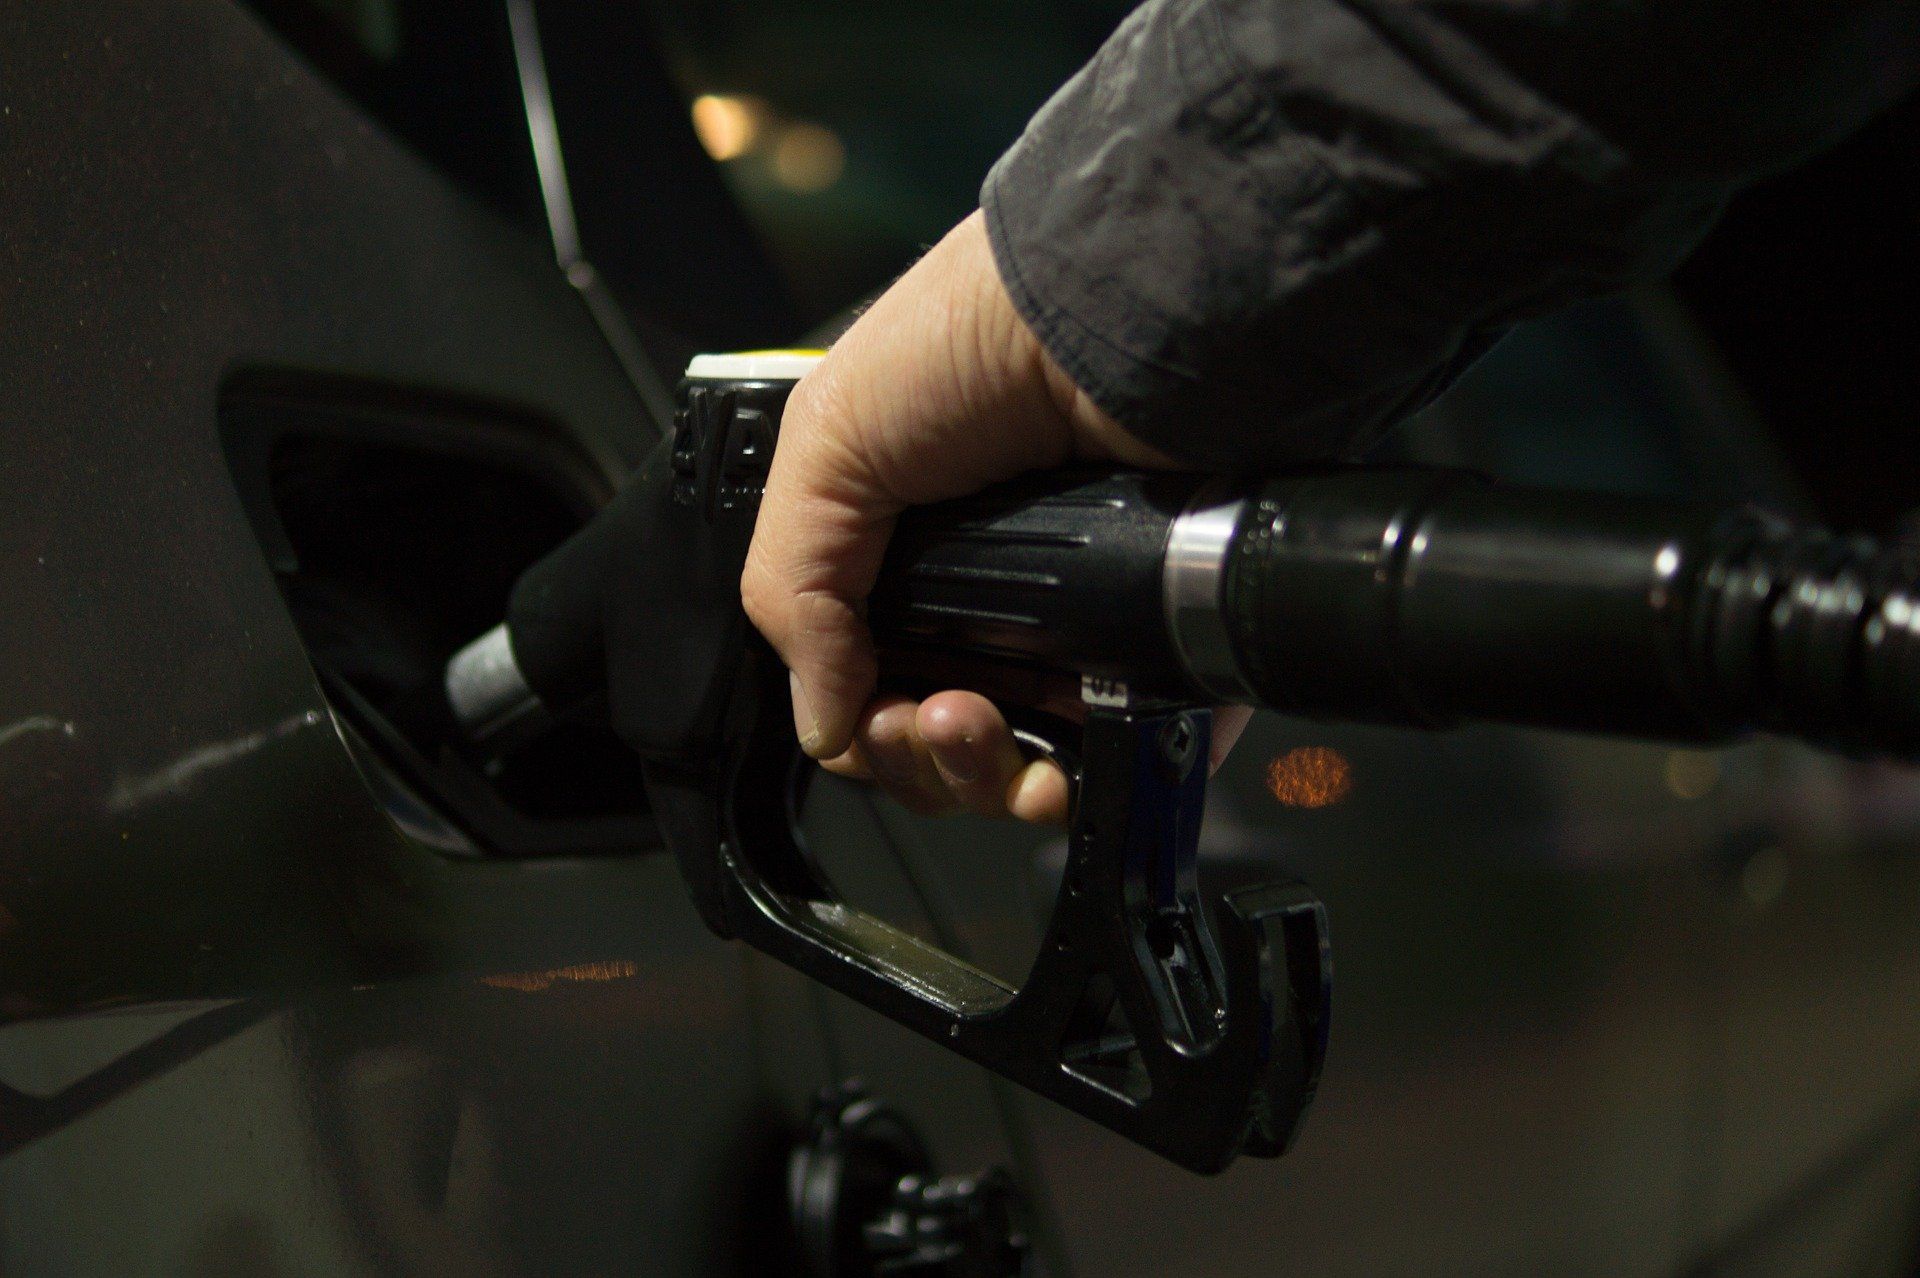 Fuel prices: Petrol priced at Rs 95.41, diesel Rs 86.67 in Delhi on February 24, 2022